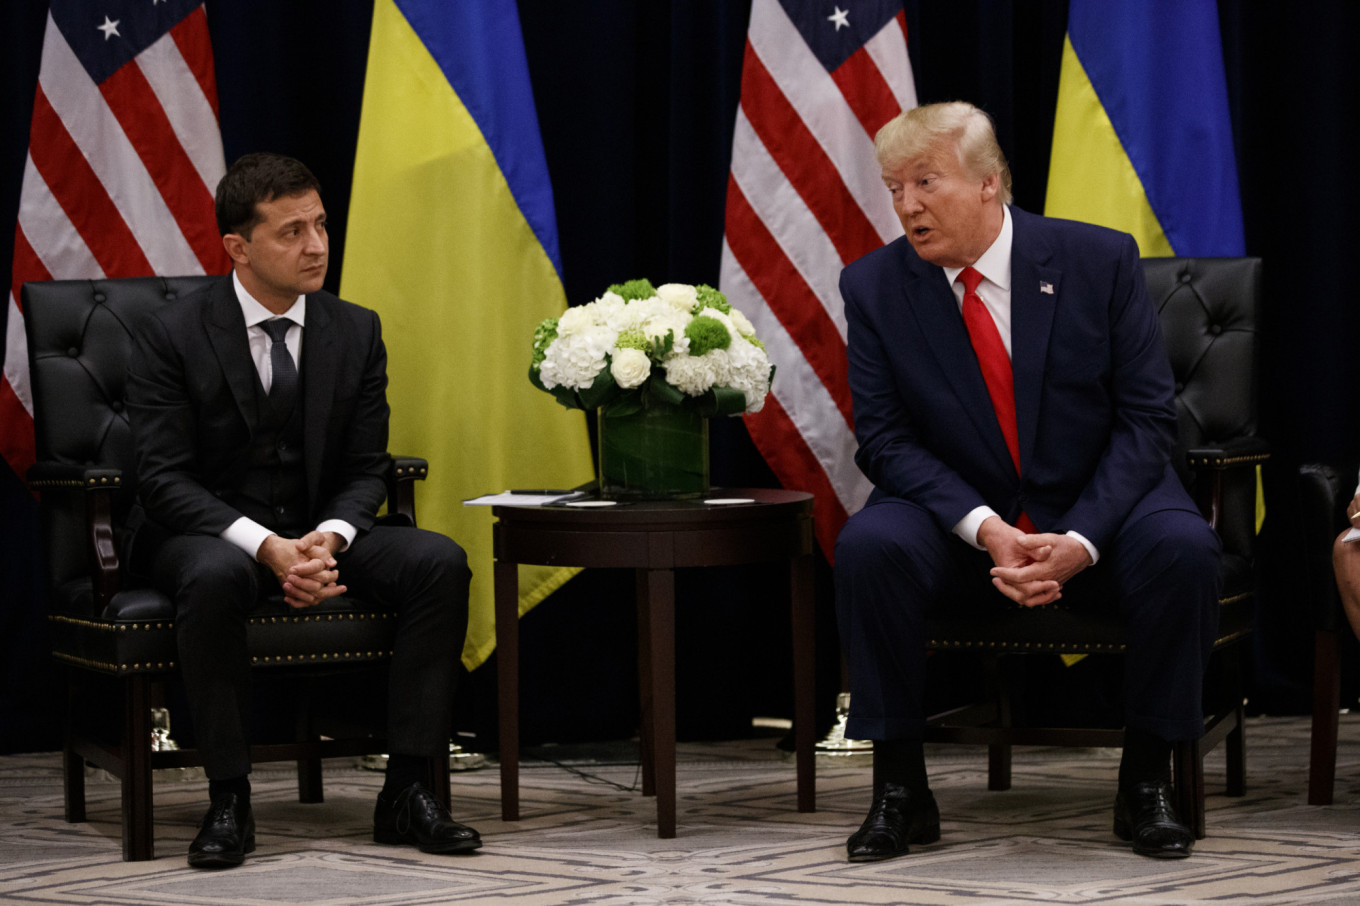 trump selling weapons to ukraine 2020 elections